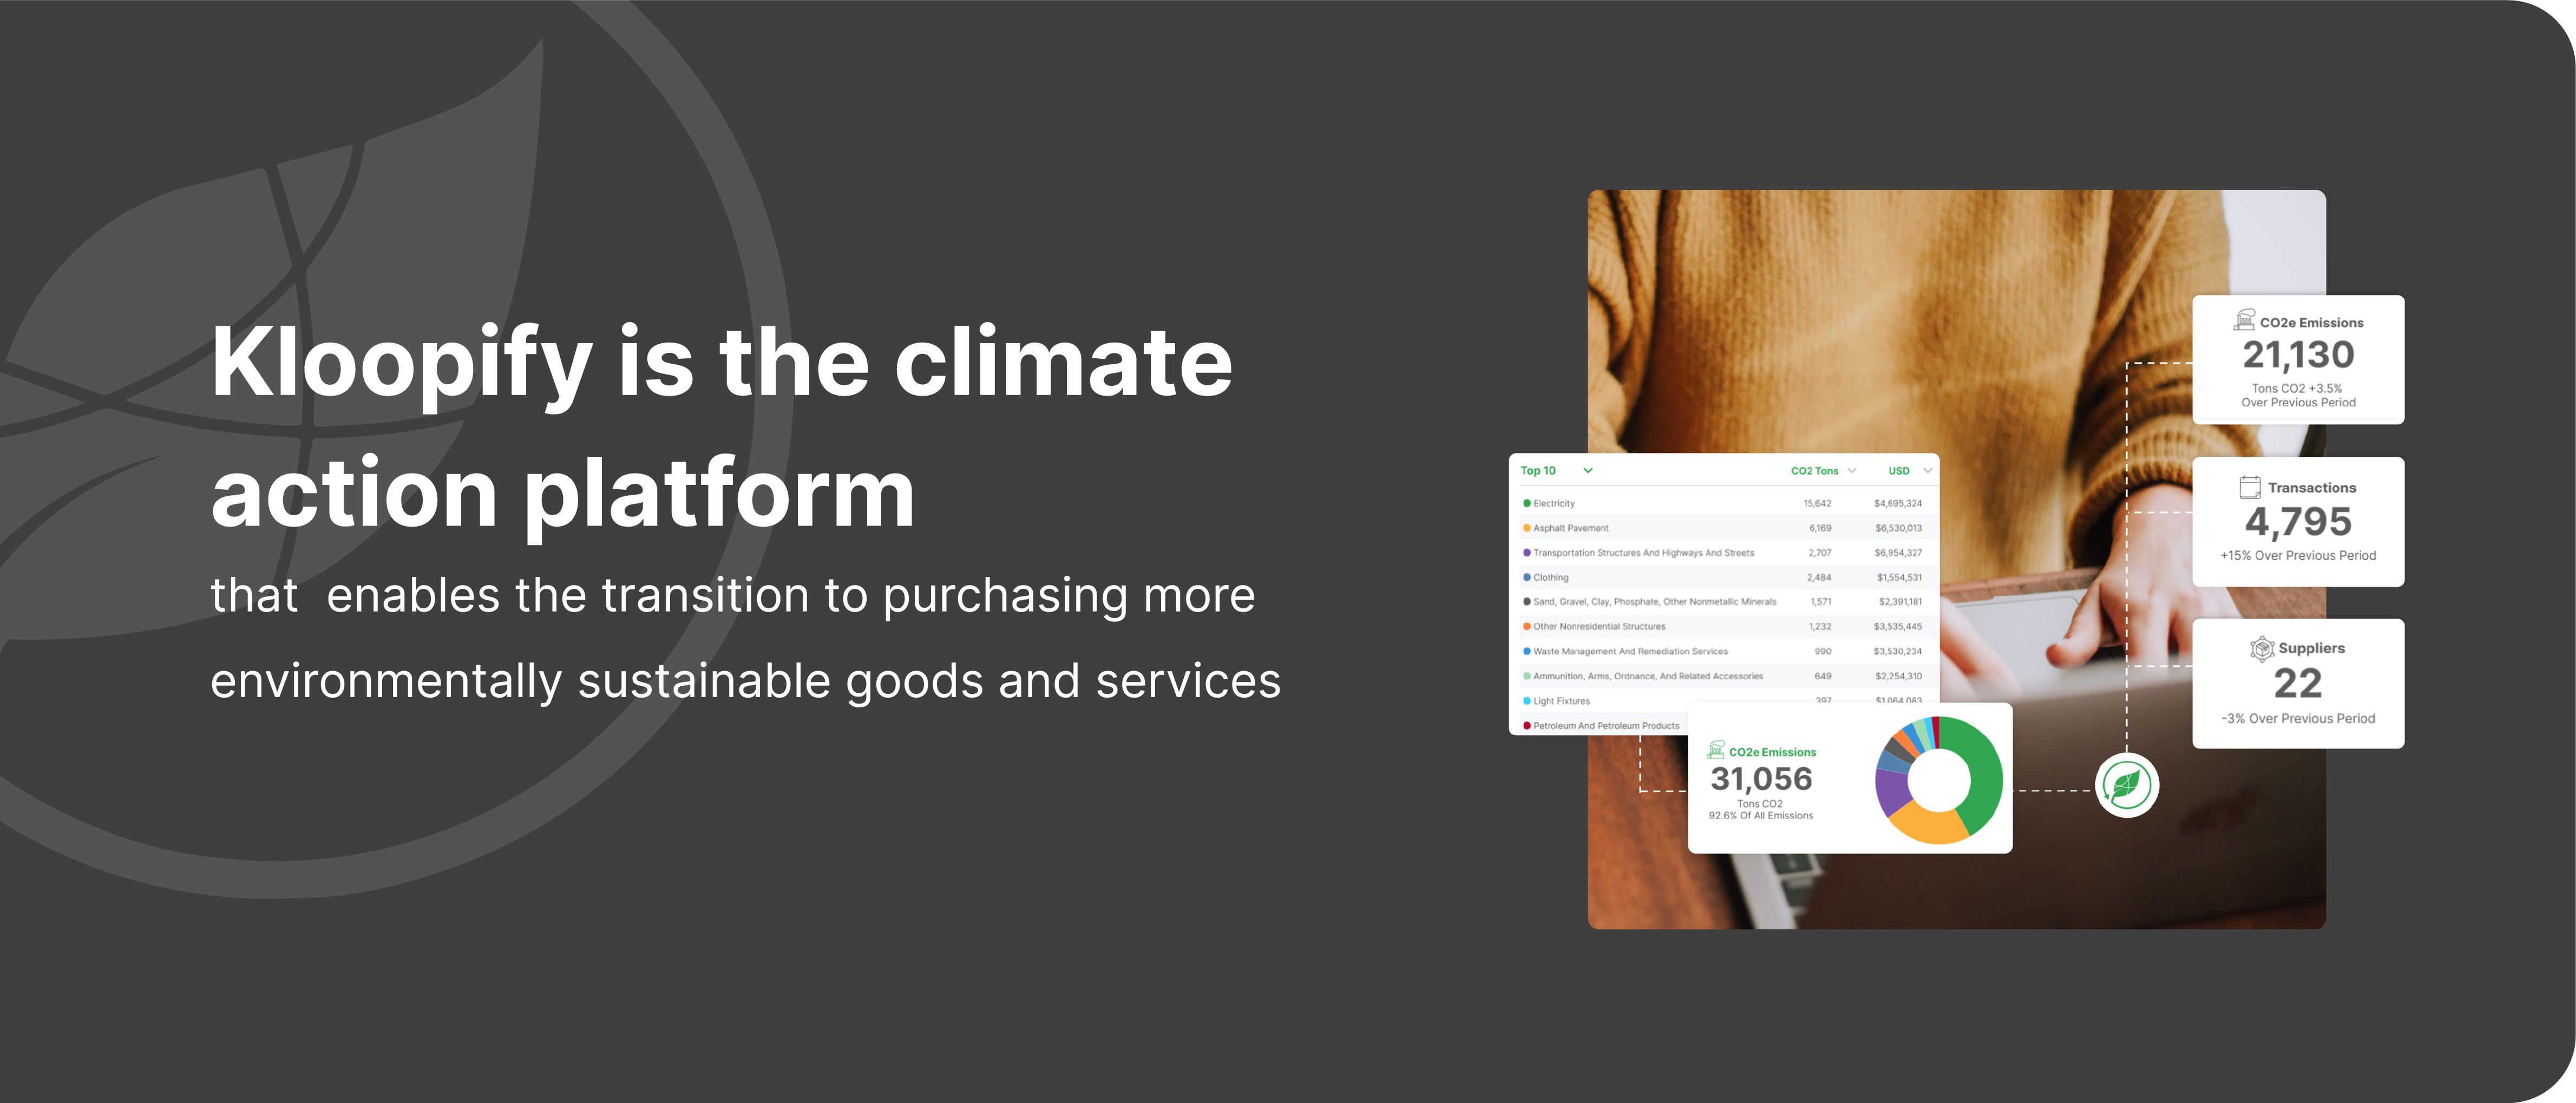 Kloopify is the climate action platform for procurement